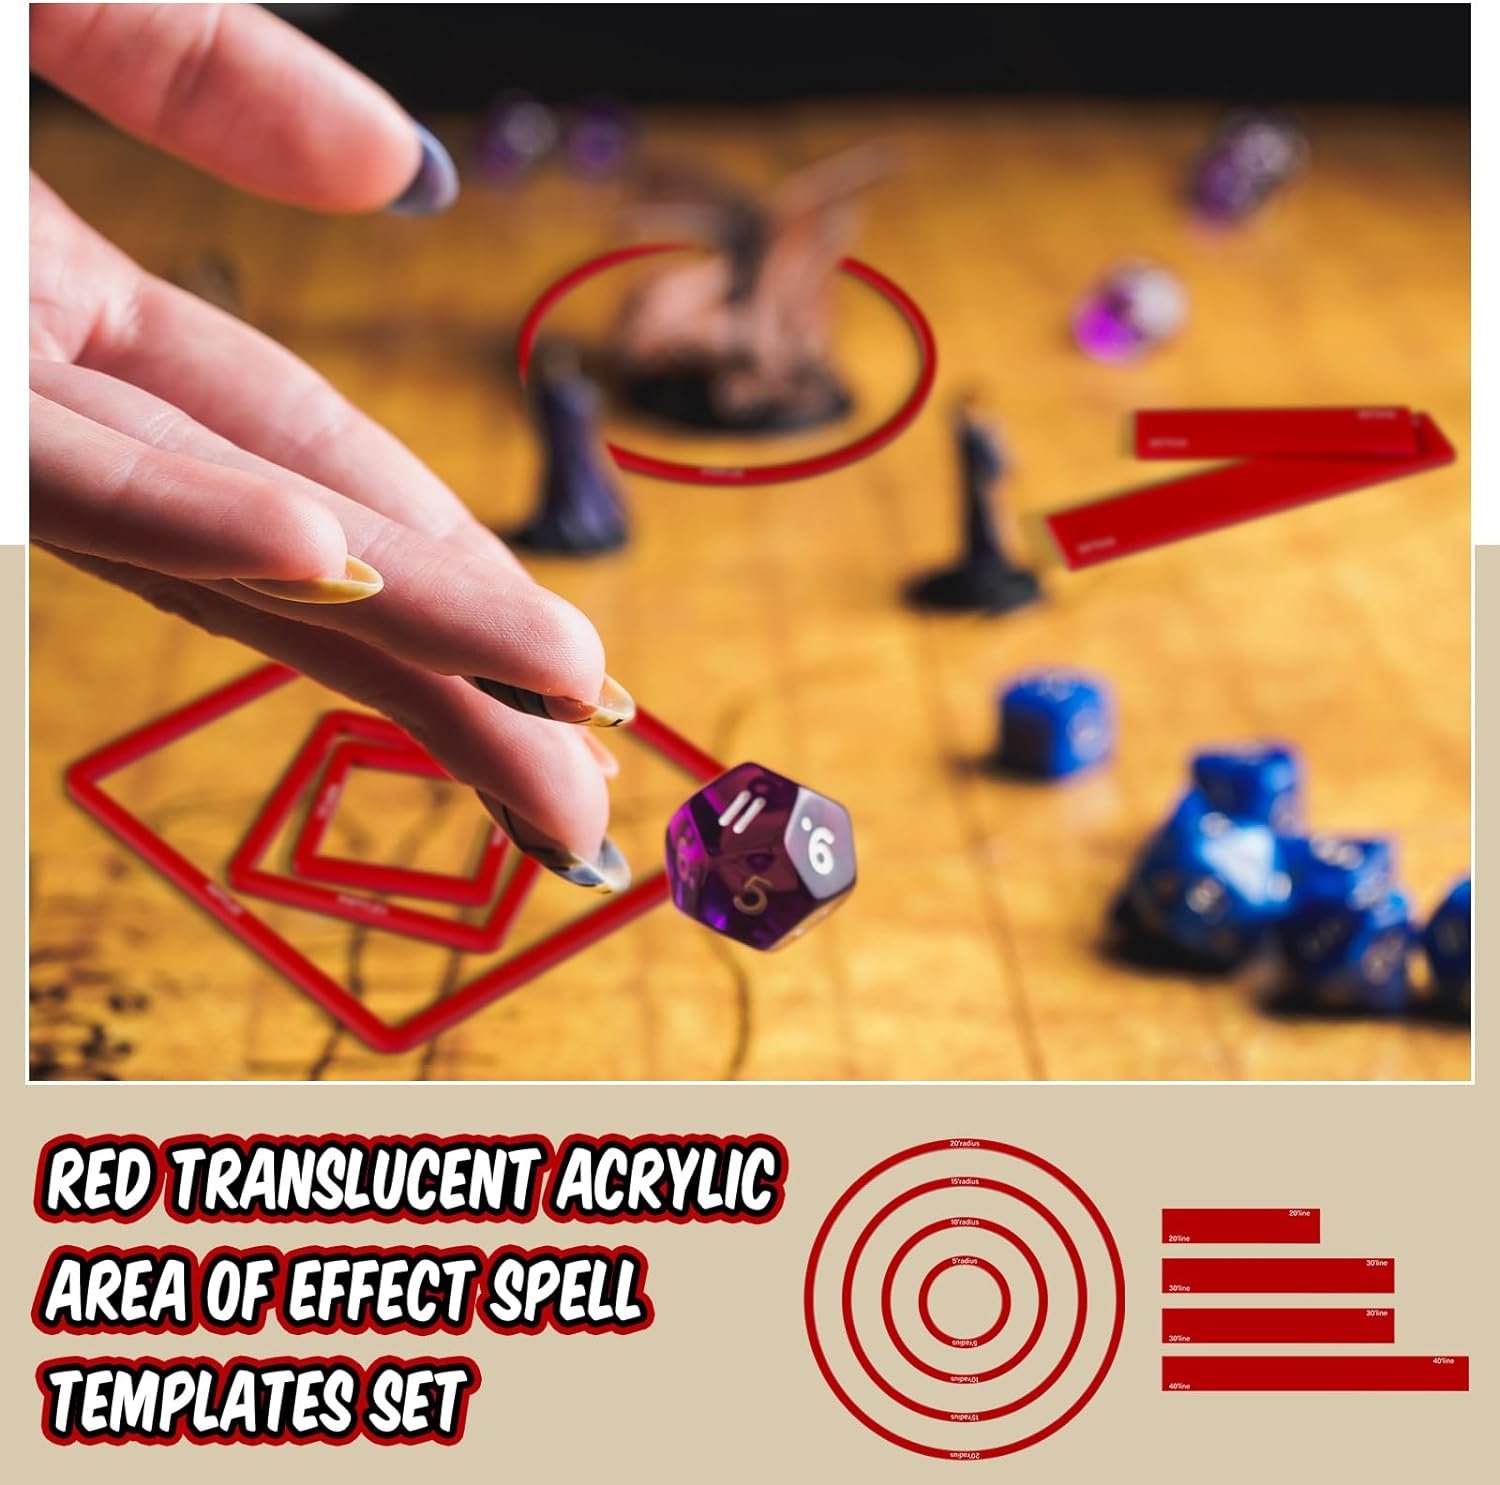 Spell AoE Damage Template Set Review